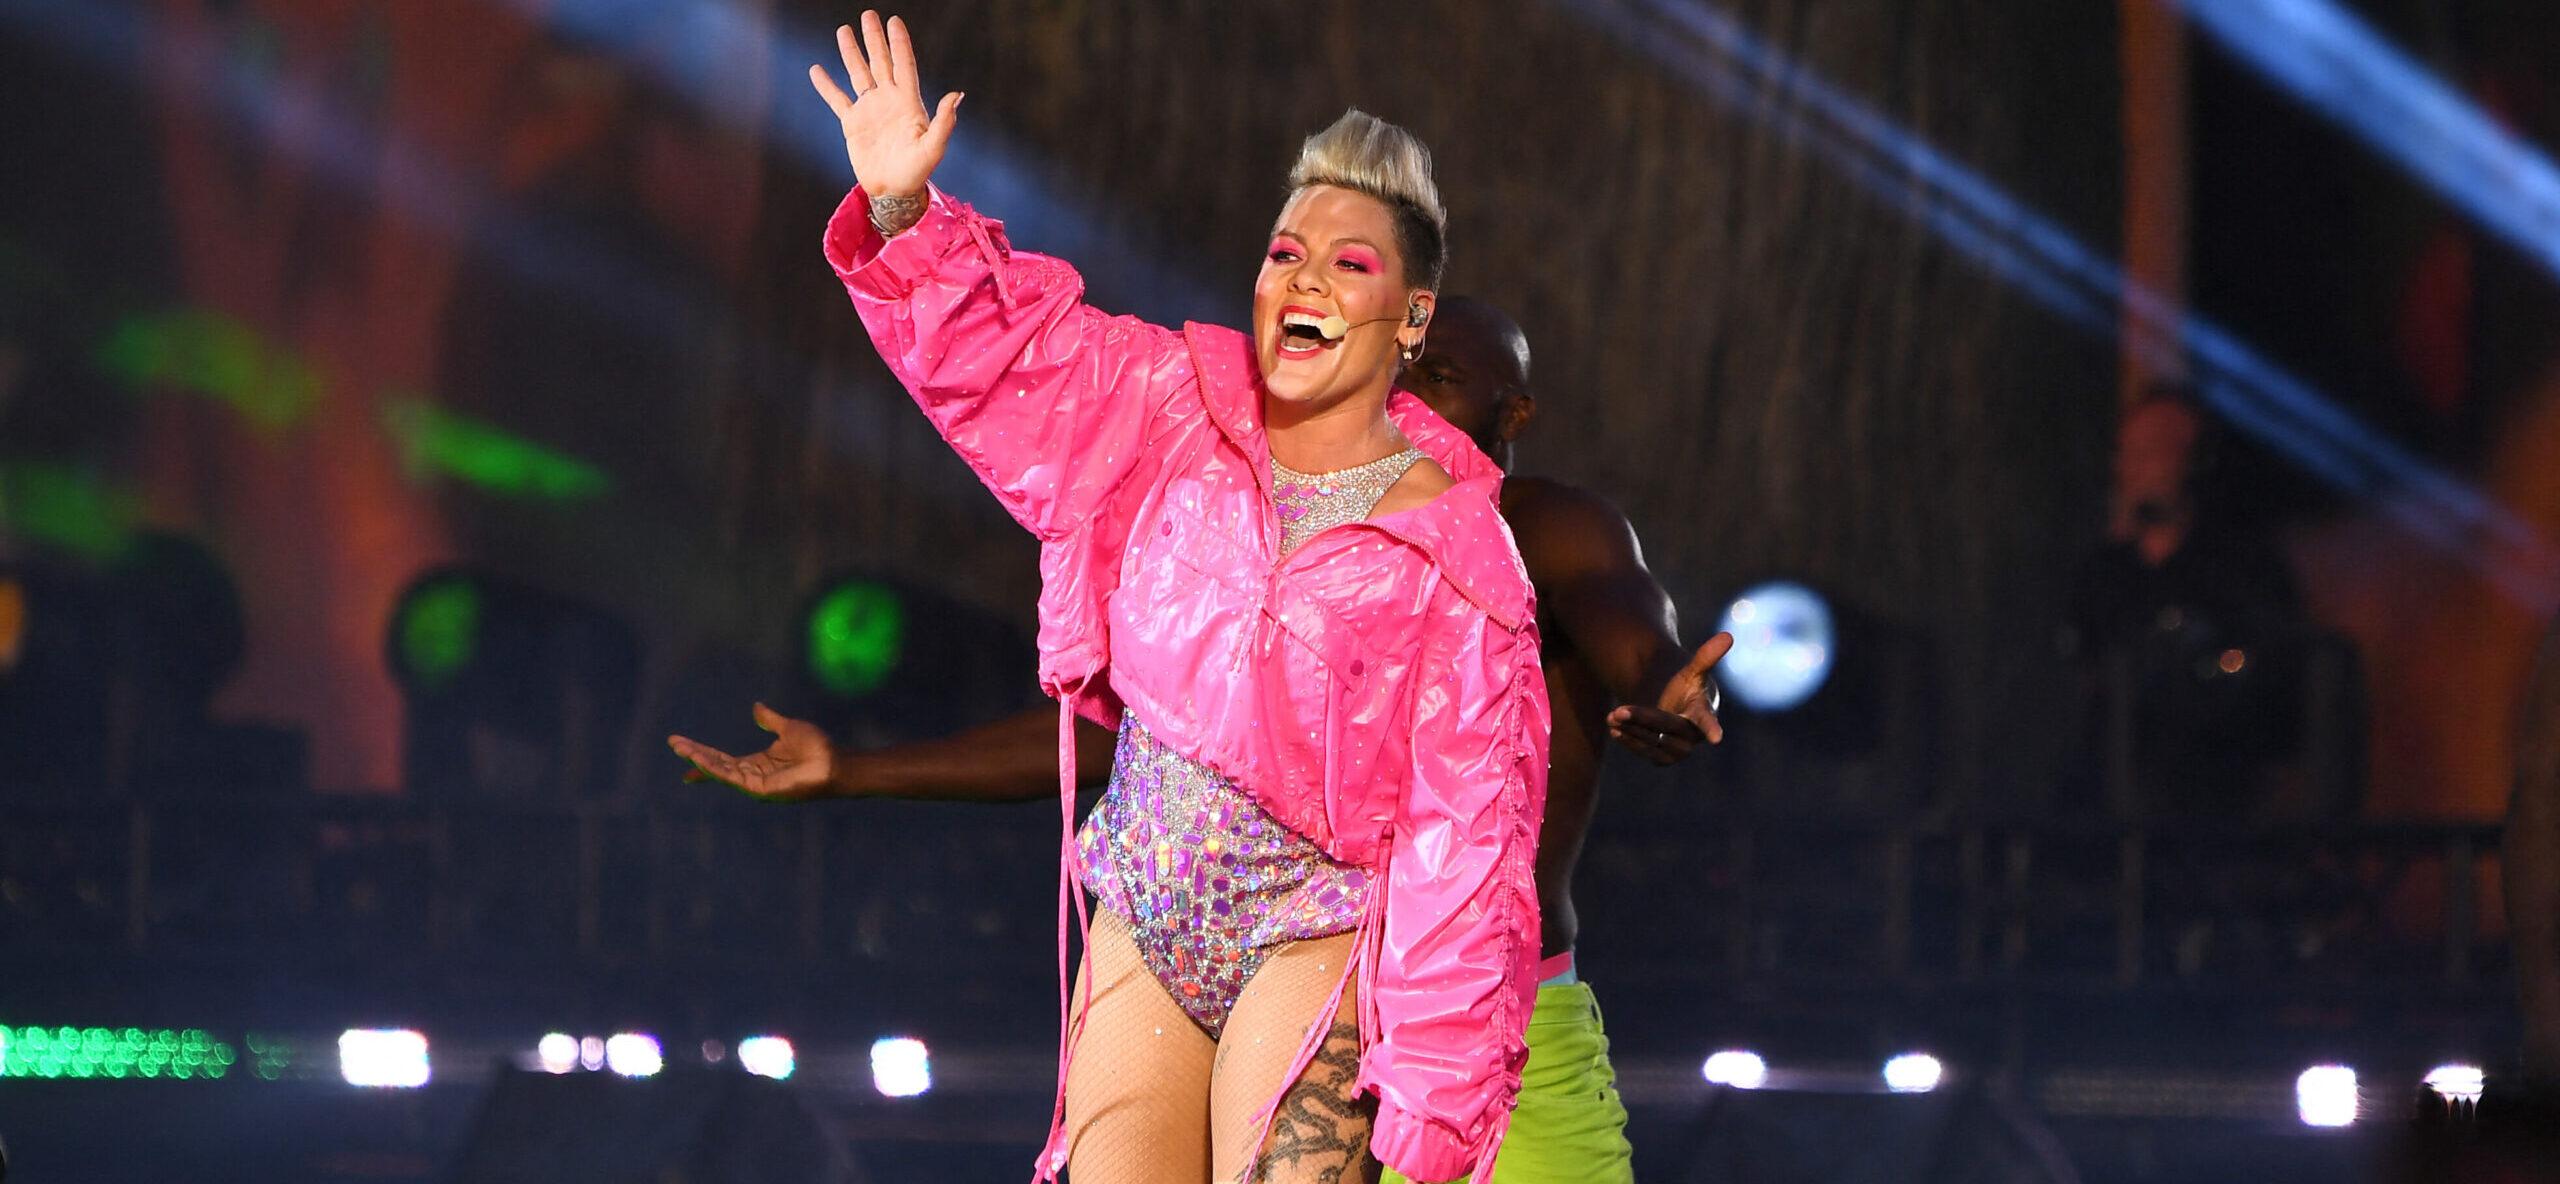 P!NK performing in London in a pink jacket